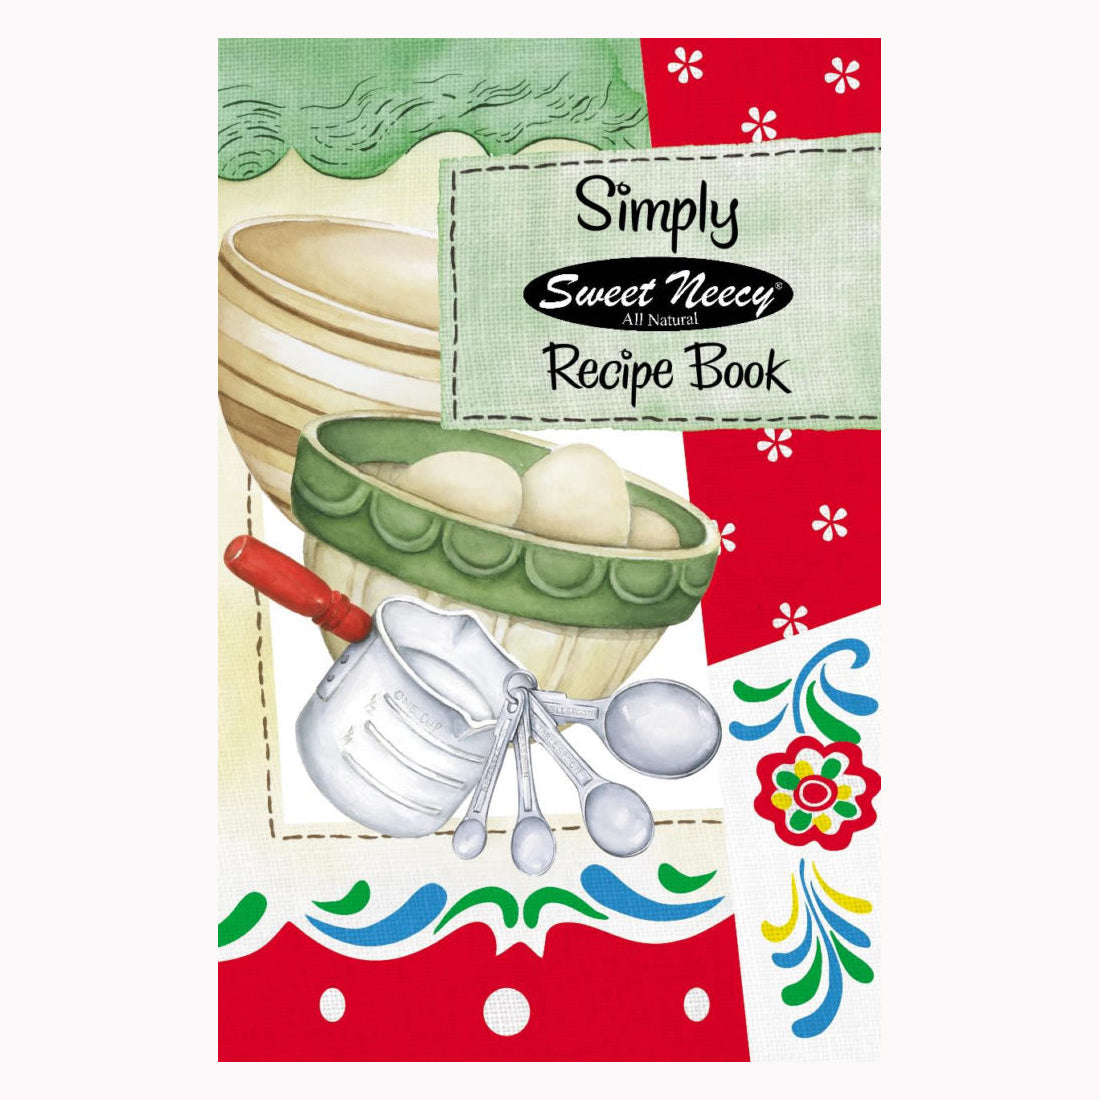 Our Batter Buddy Recipe Book